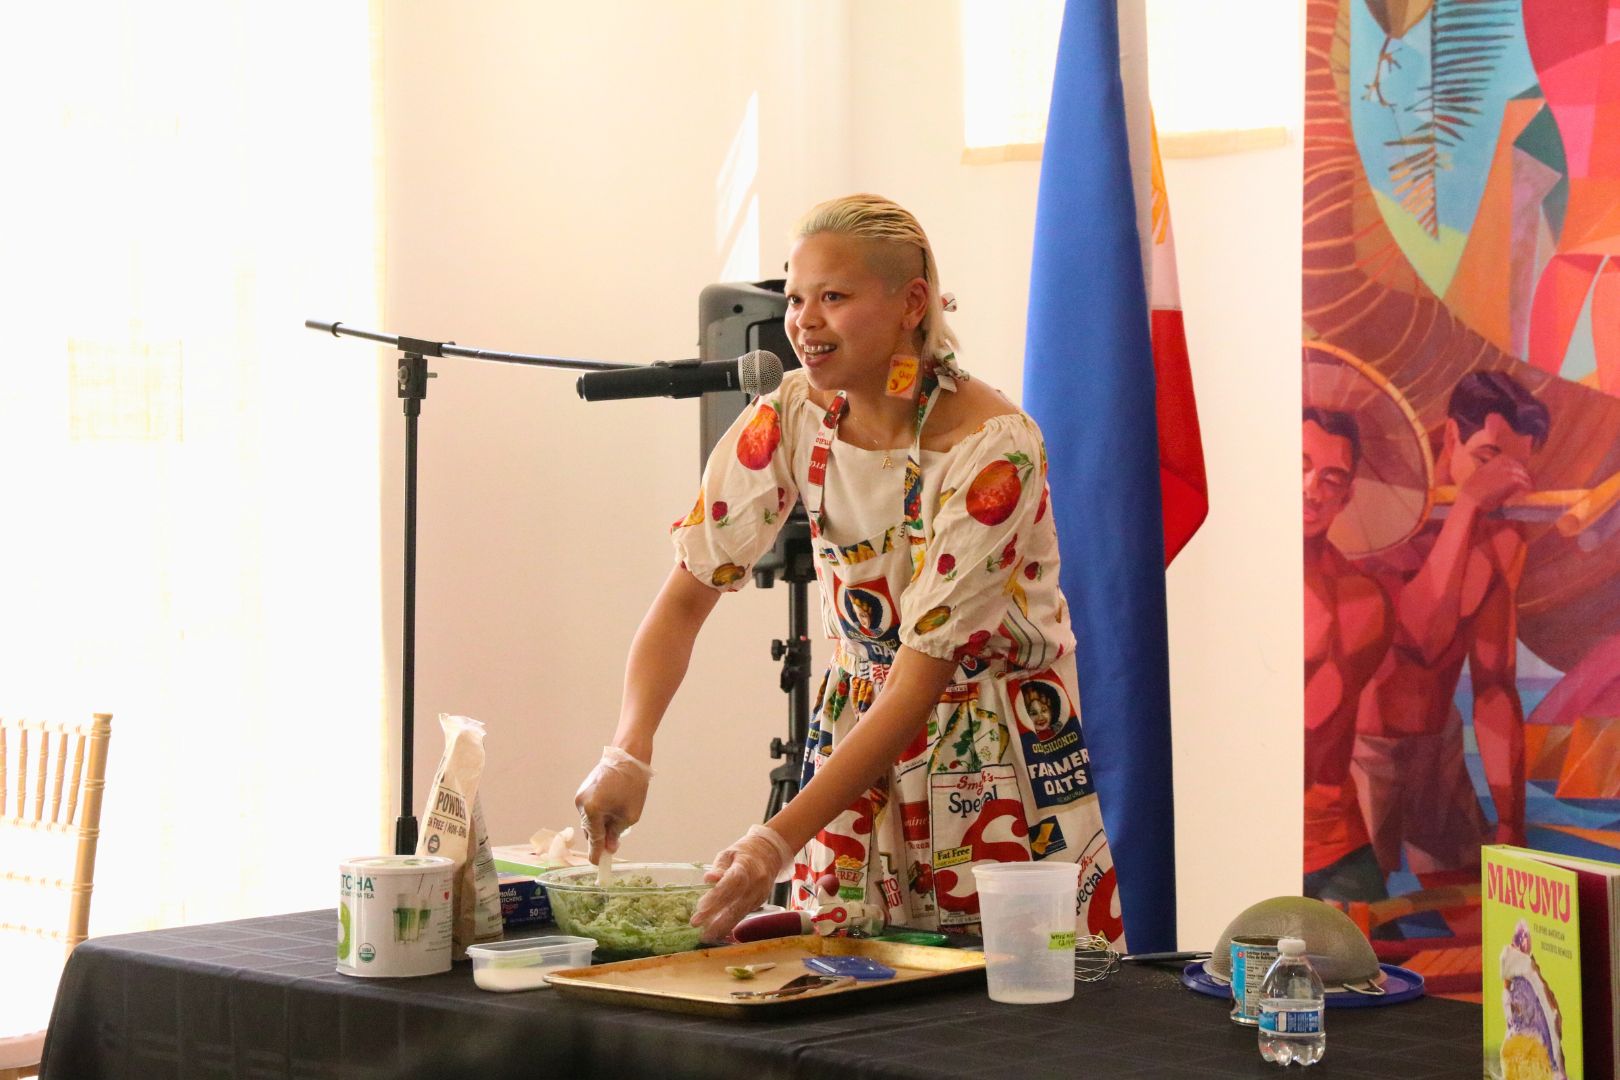 Abi demonstrates how to make matcha pastillas, a recipe from her book Mayumu.